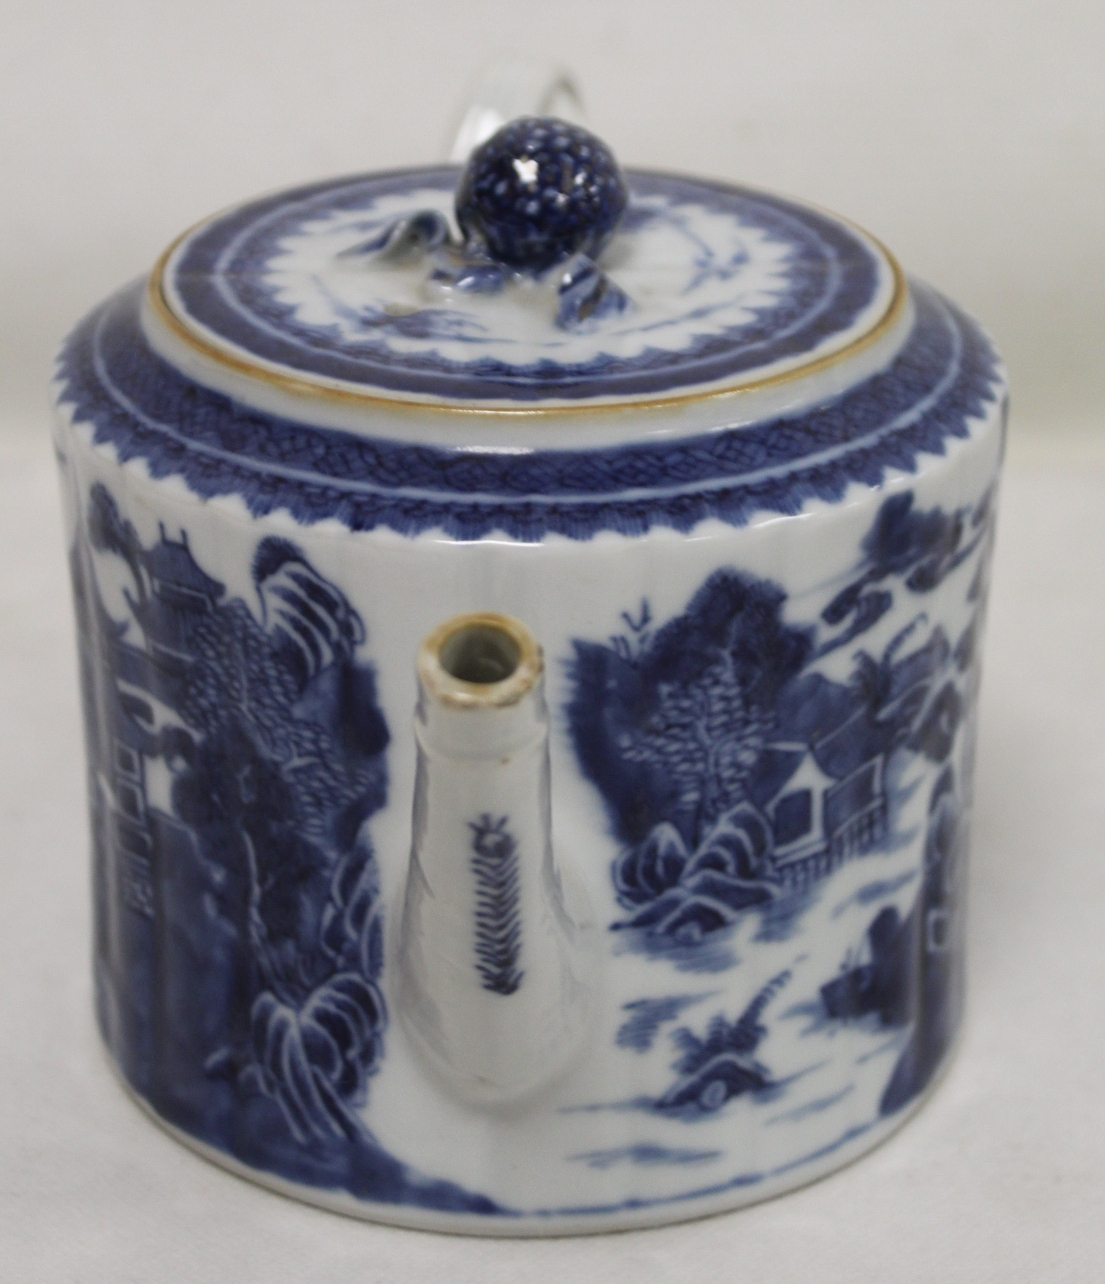 18th century Chinese blue and white porcelain teapot of reeded cylindrical form with entwined - Image 5 of 21